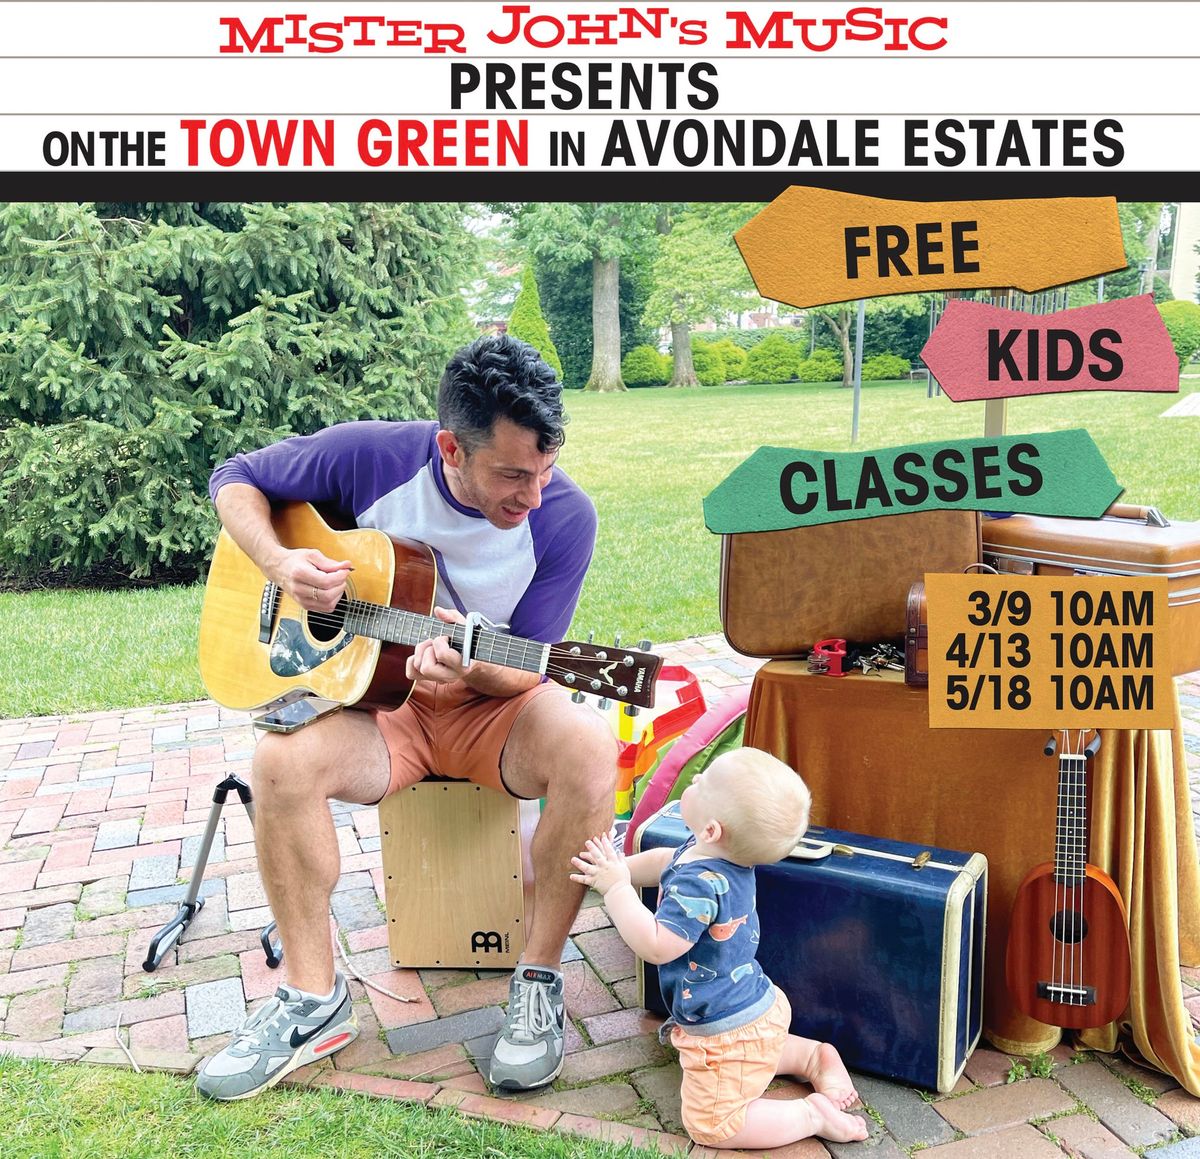 Free Kids Classes with Mister John's Music